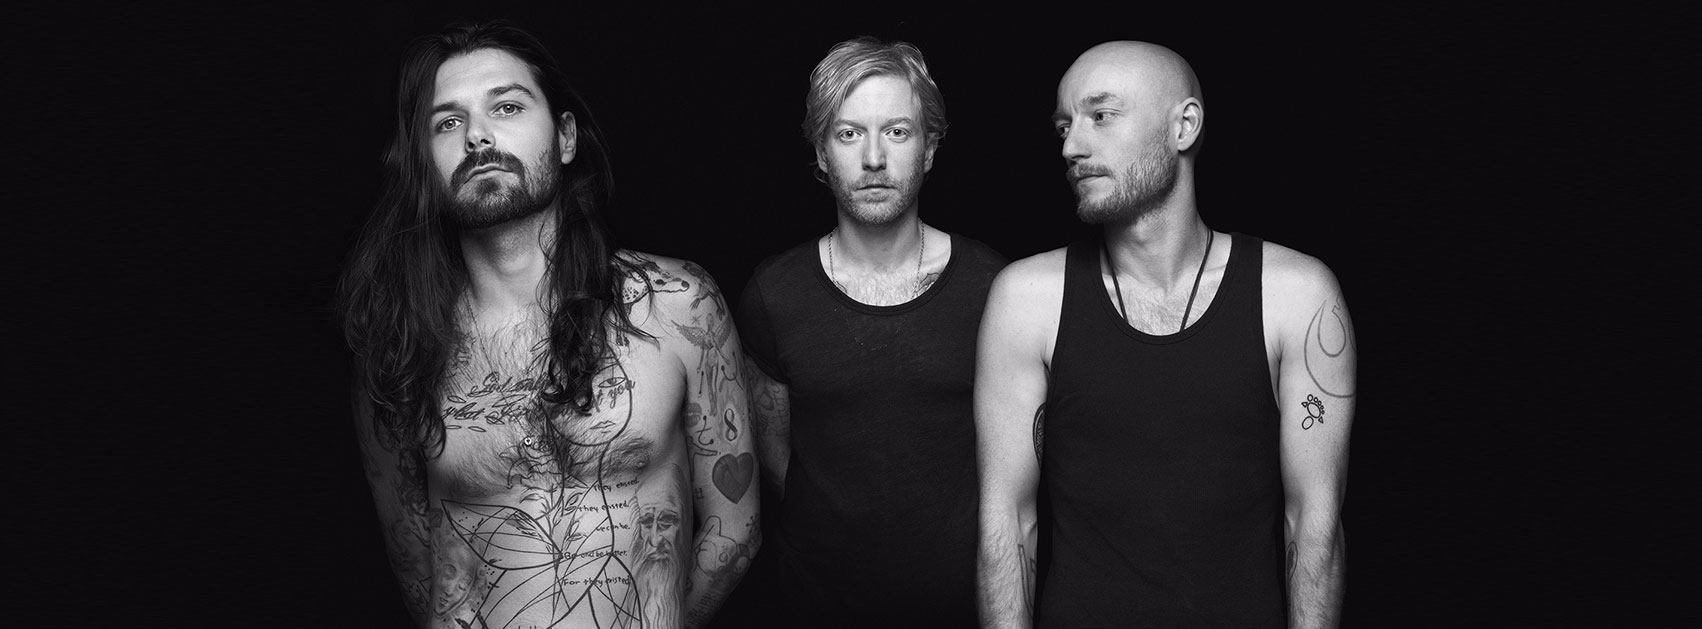 Biffy Clyro Premiere Explosive New Music Video for “Flammable”